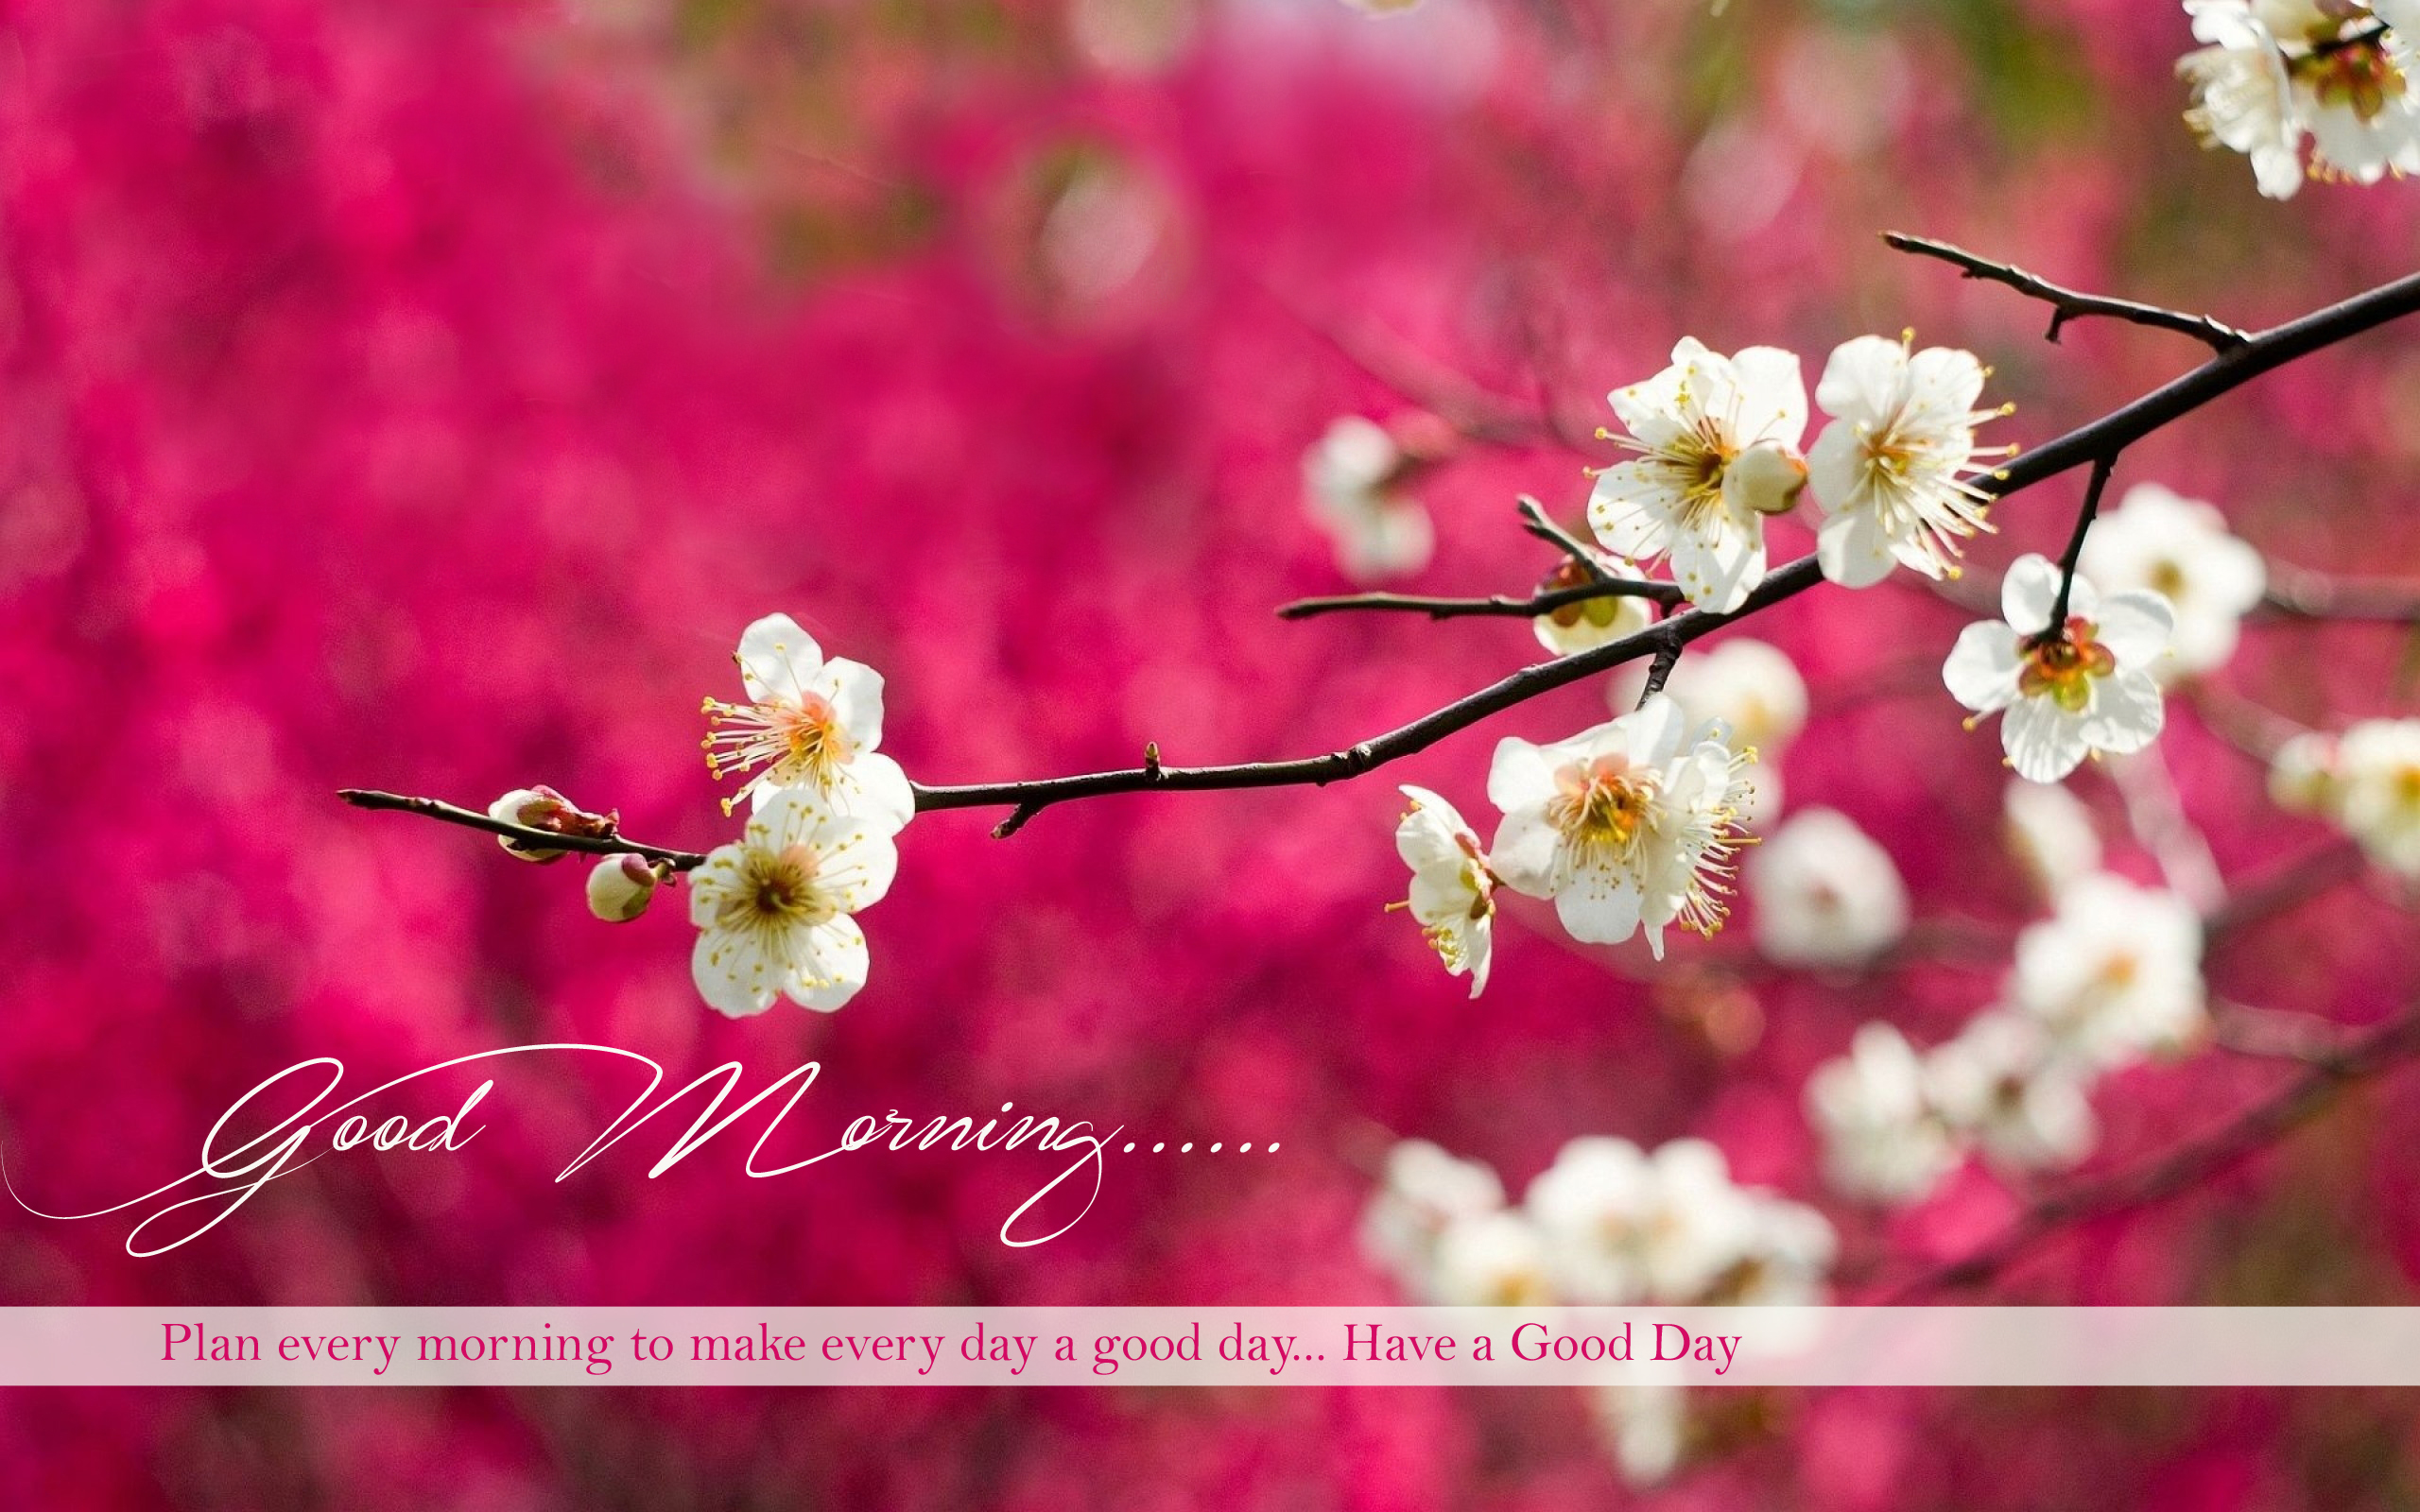 Good Morning Wishes HD Wallpapers